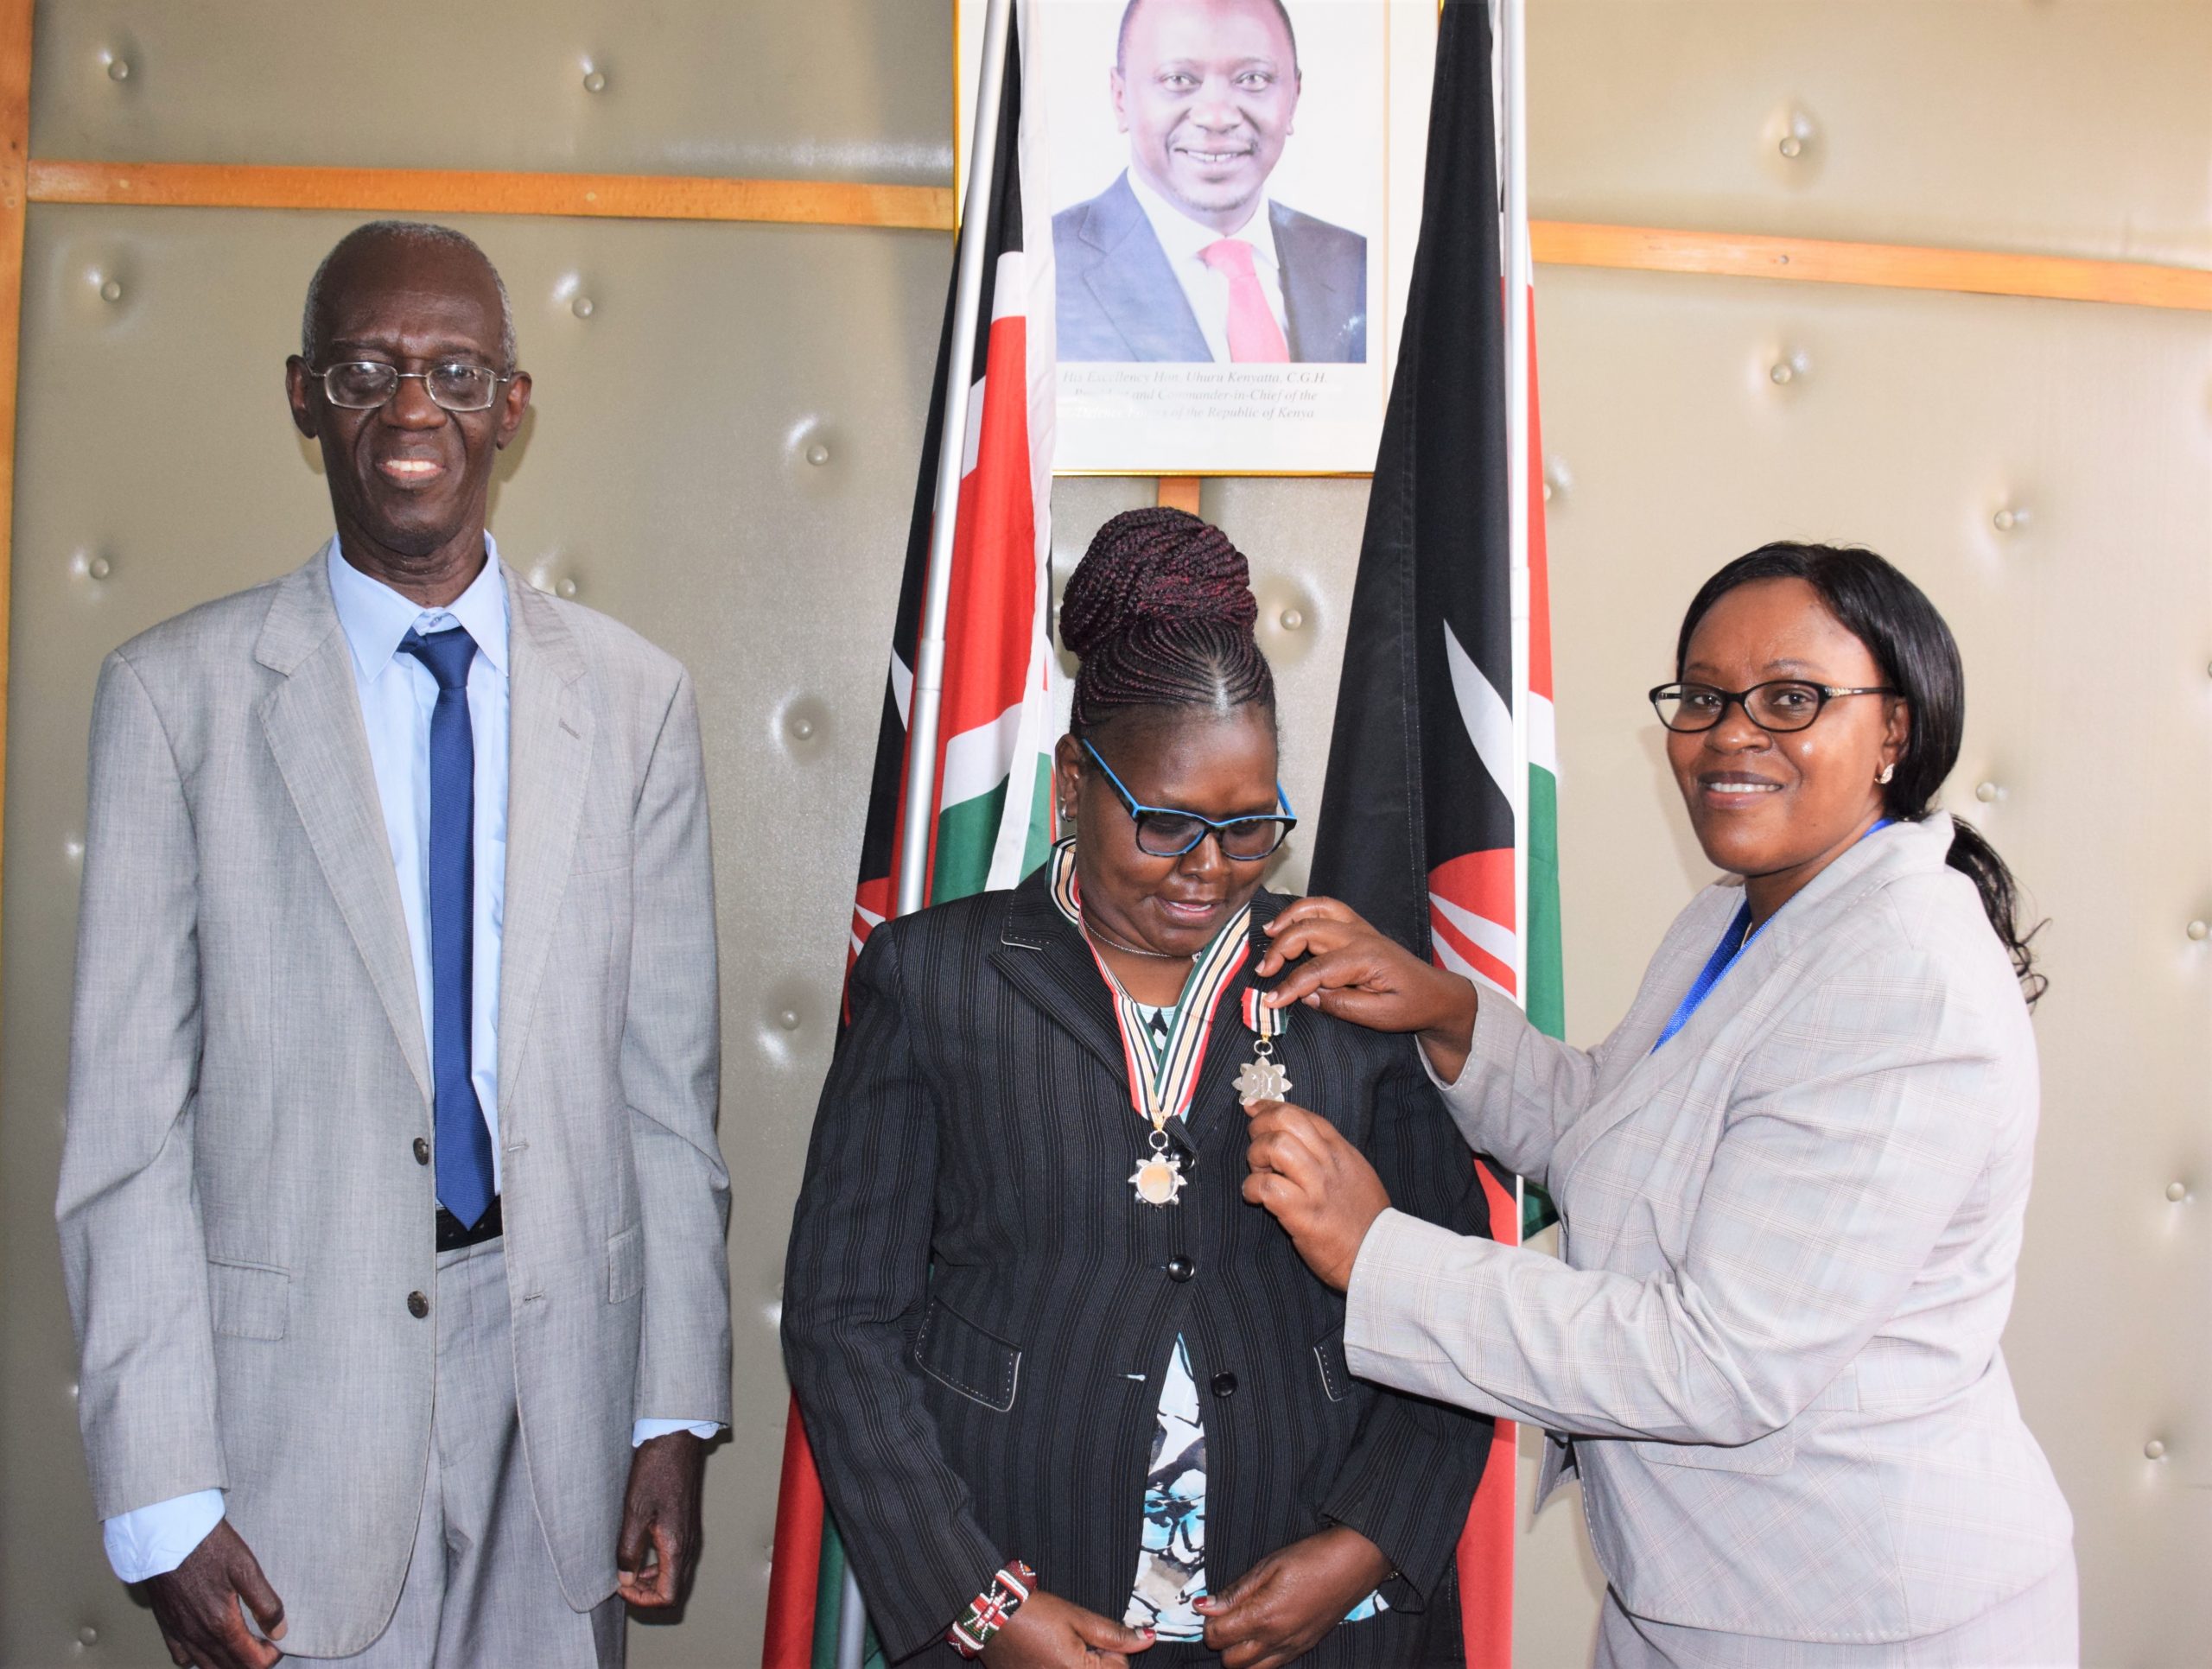 EACC Celebrates Staff Conferred State Awards